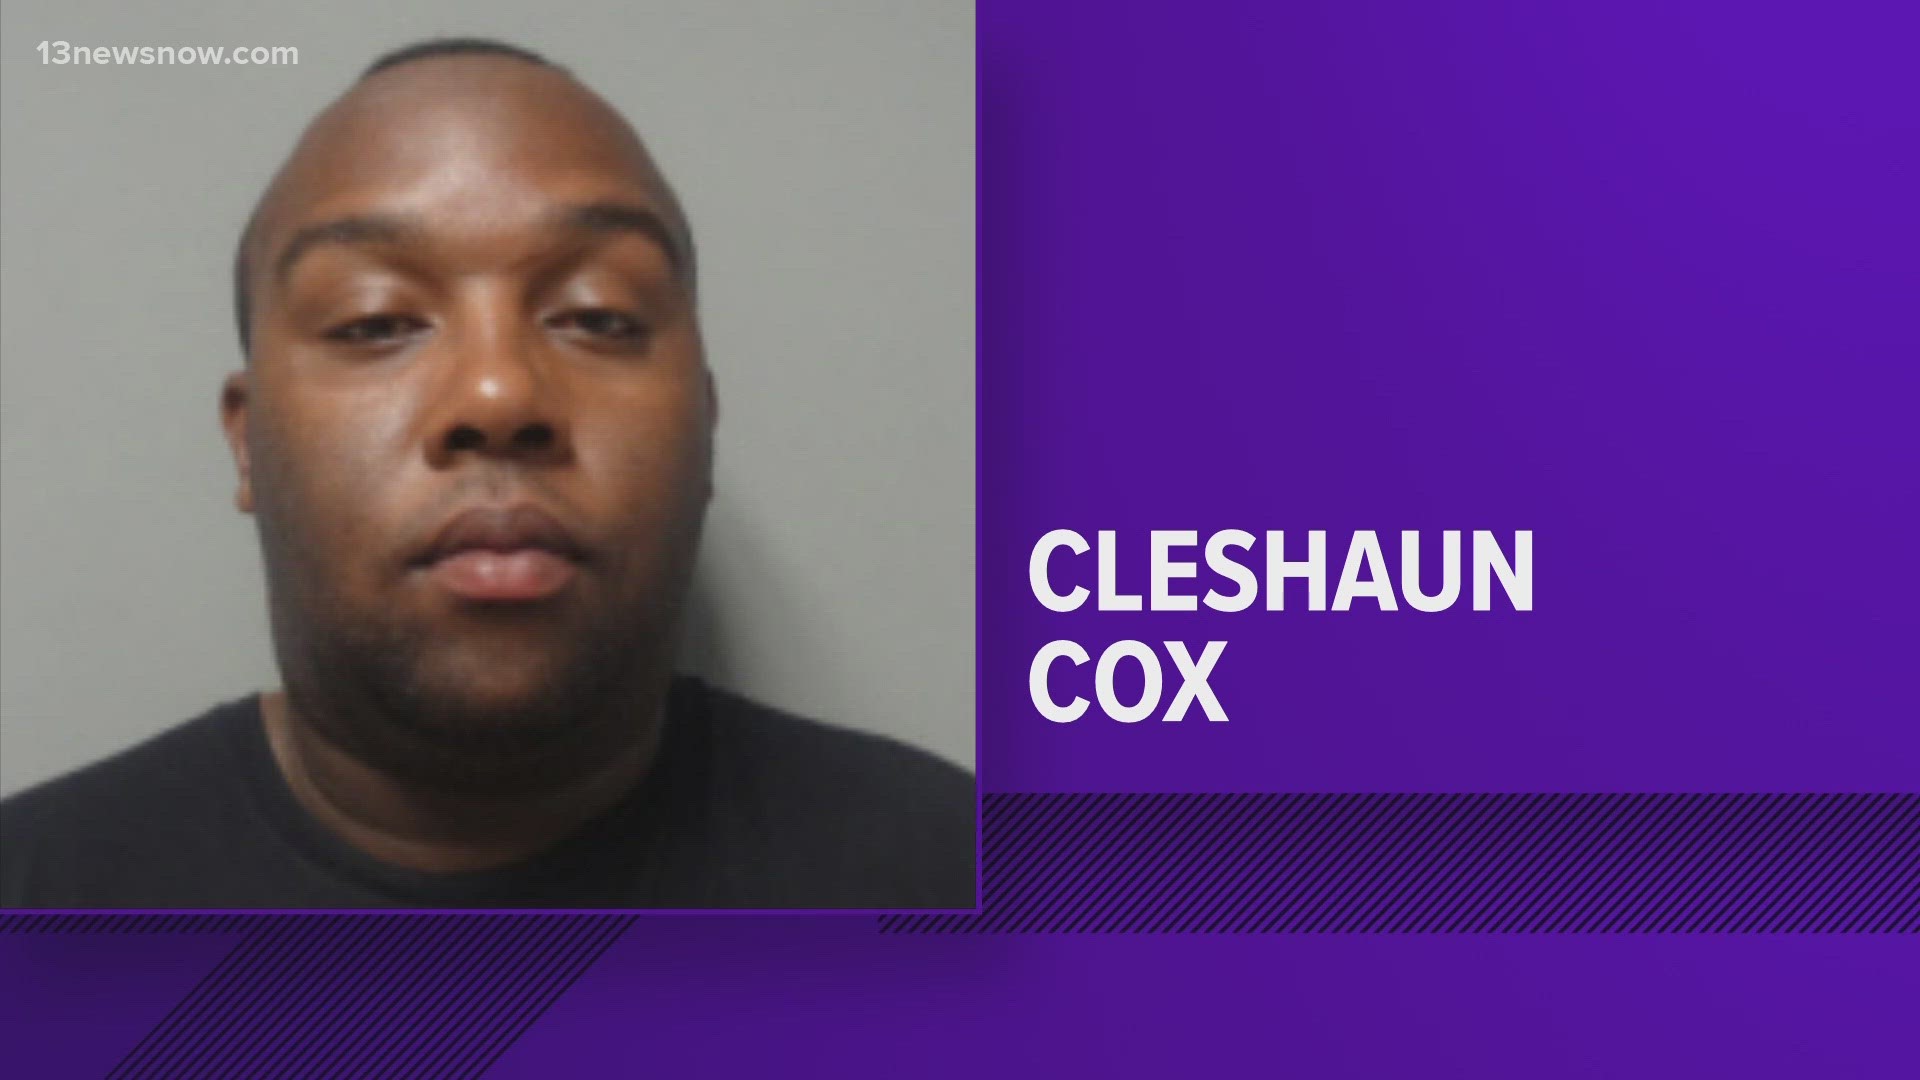 A former Portsmouth police officer convicted on state charges of abducting and sexually assaulting a teenager in 2019 pleaded guilty to a new federal charge.